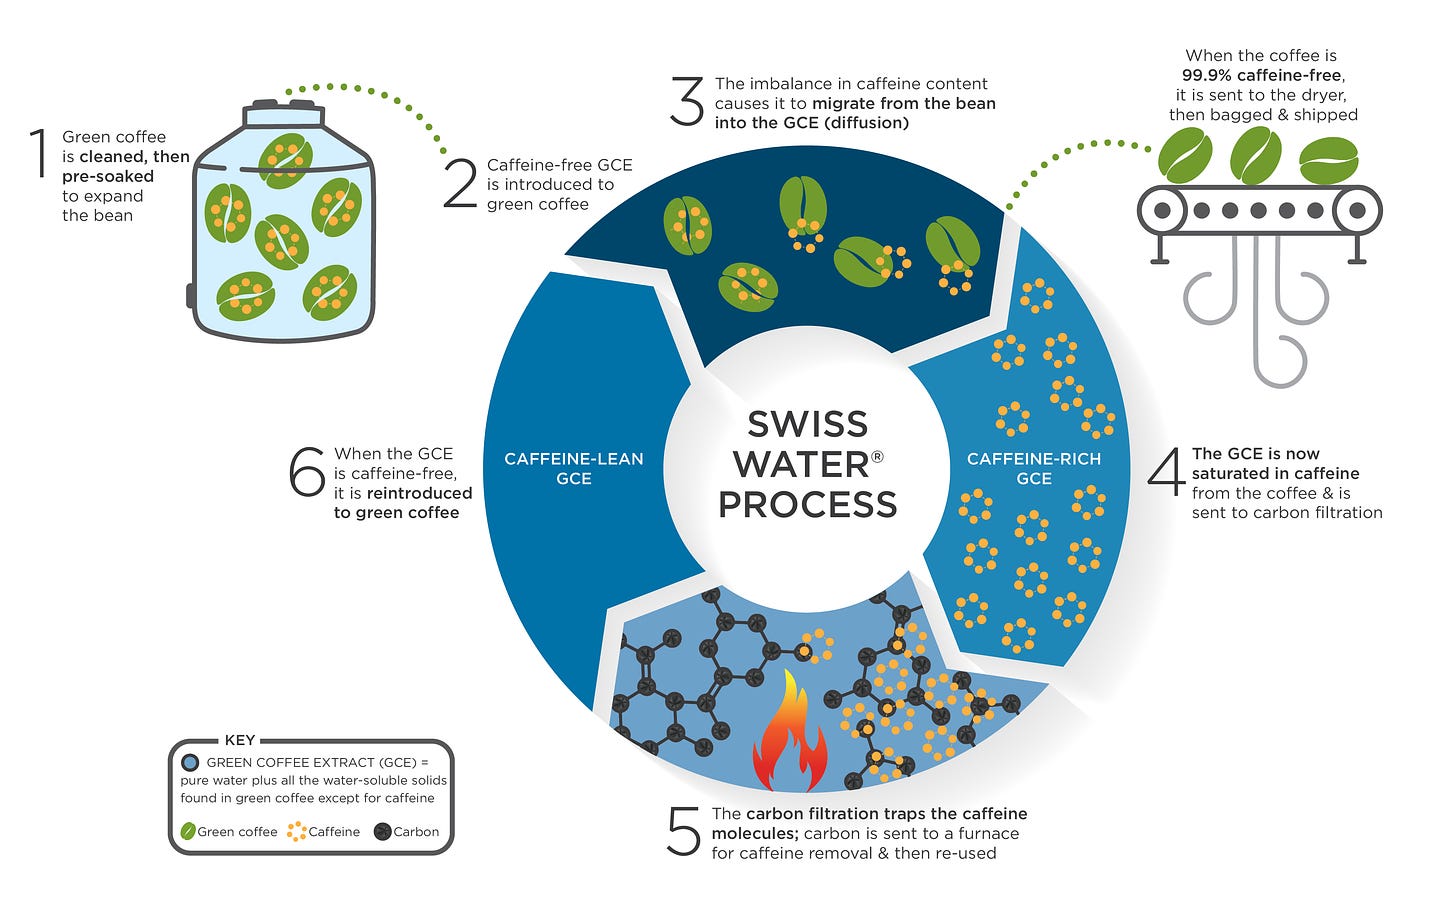 This is an infographic describing the five step process the Swiss Water company uses to take the caffeine out of a coffee bee.